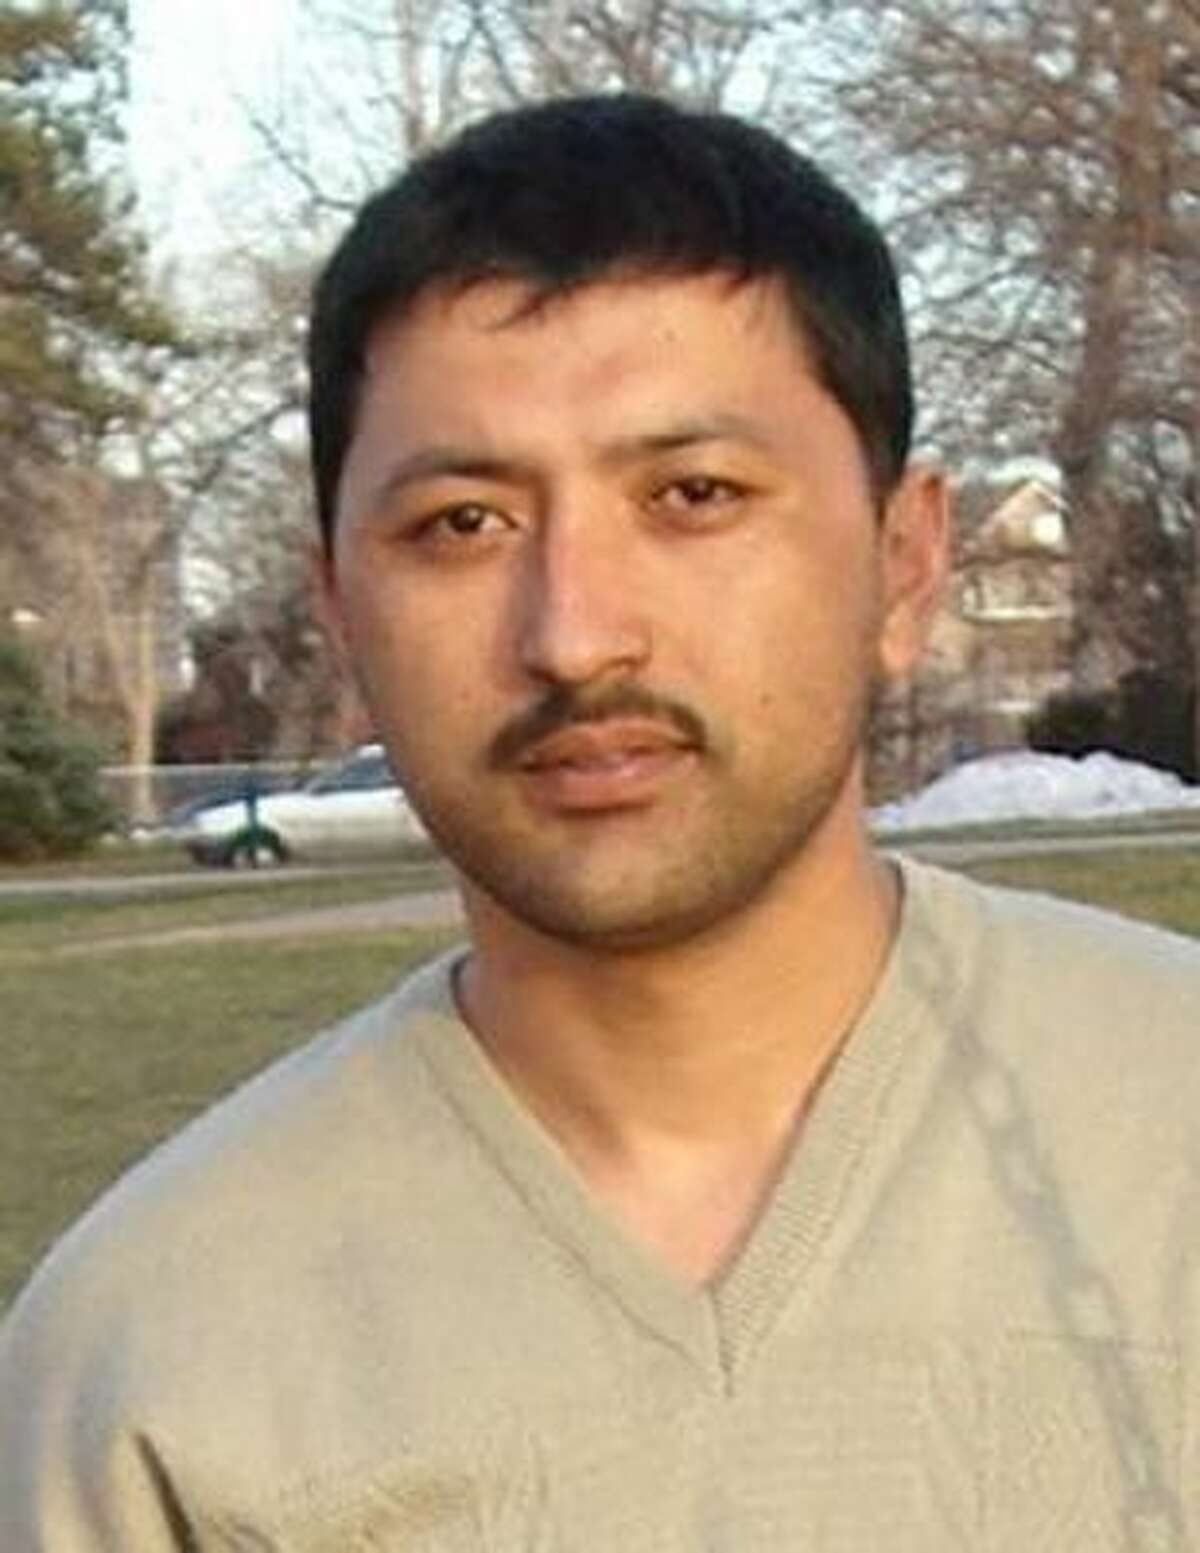 Jamshid Muhtorov of Aurora was arrested Jan. 21, 2012 in Chicago, accused of providing and trying to provide material support for the Islamic Jihad Union, which the U.S. State Department has designated as a terrorist organization.